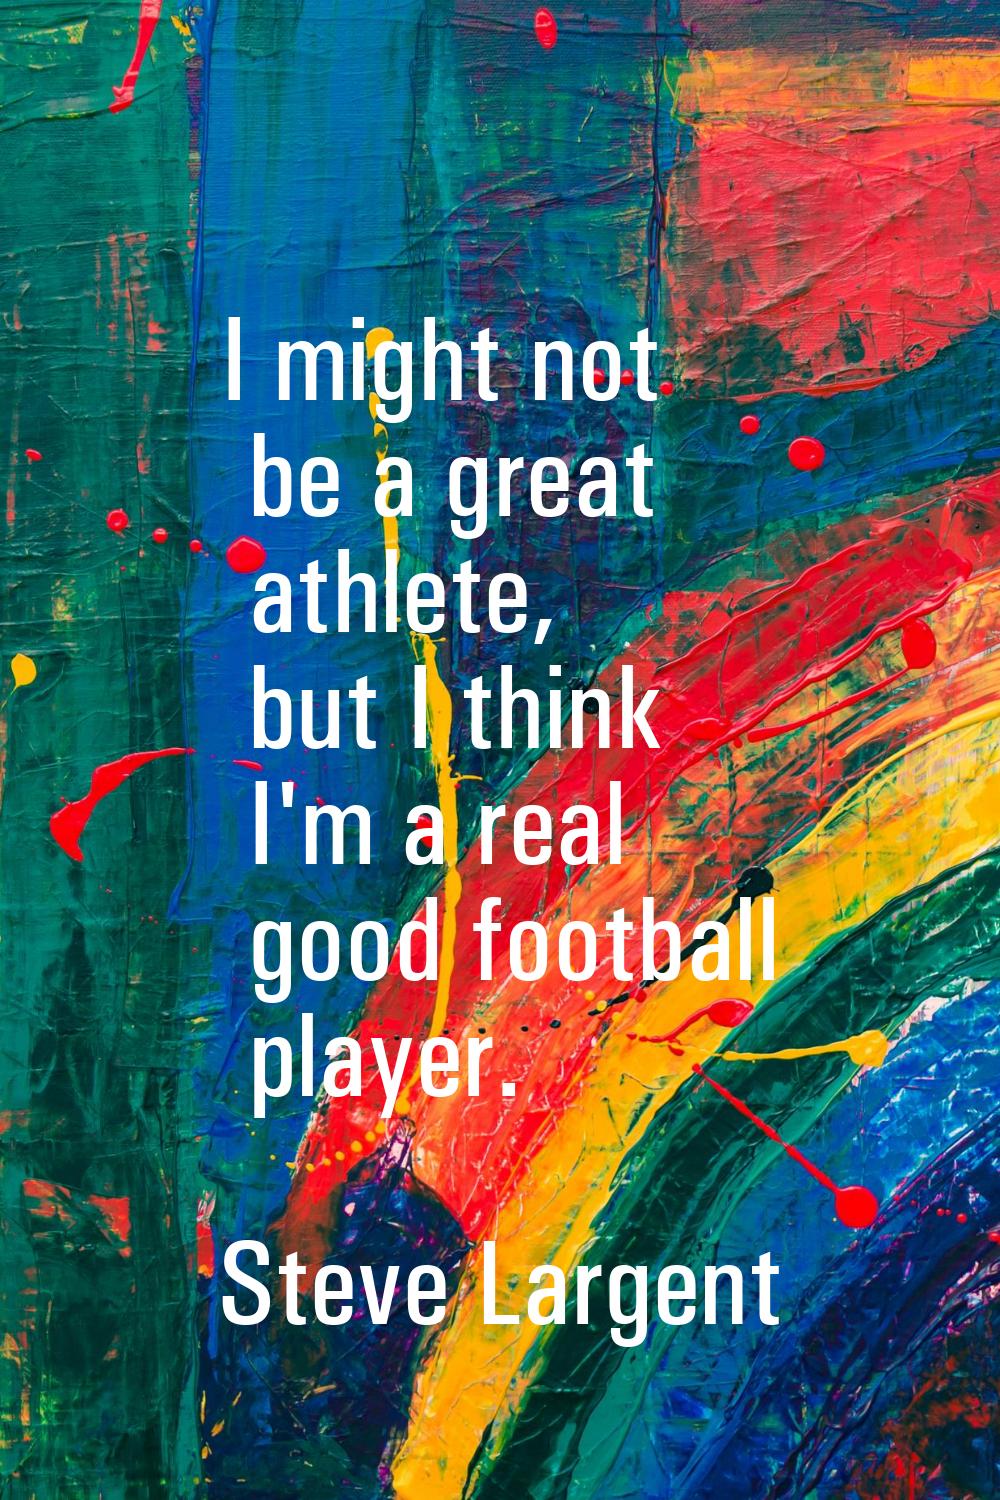 I might not be a great athlete, but I think I'm a real good football player.